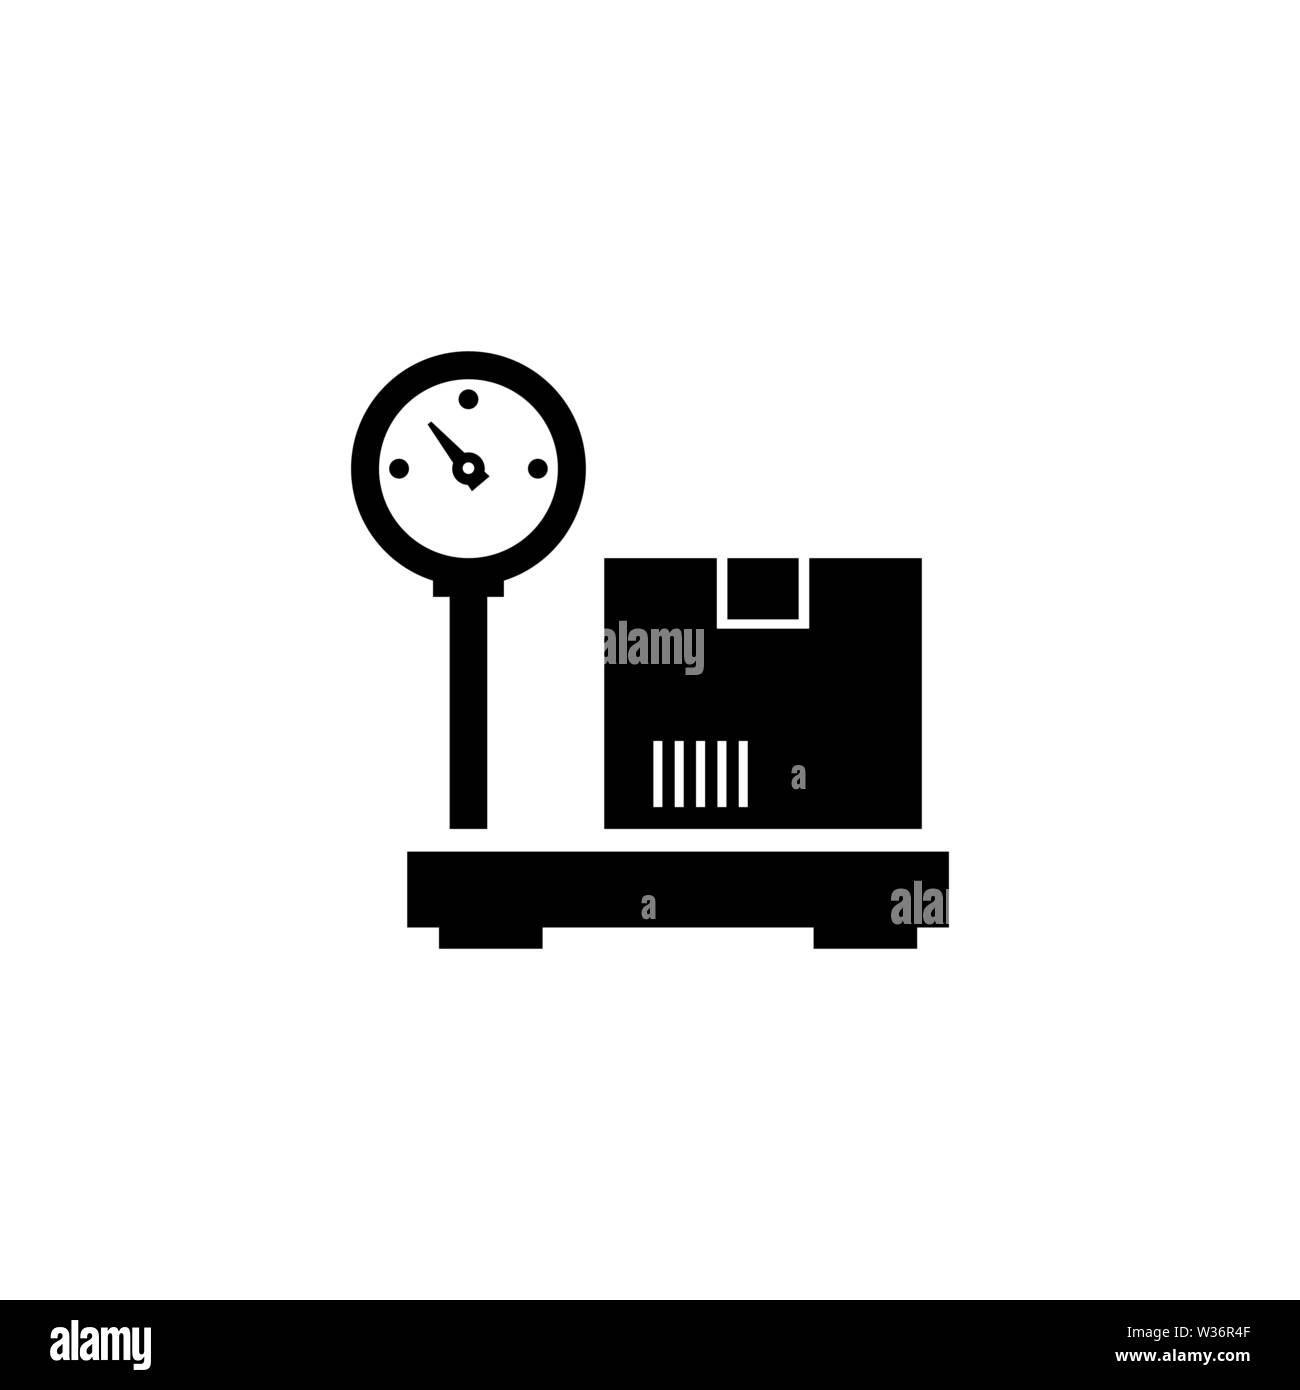 https://c8.alamy.com/comp/W36R4F/industrial-cargo-weight-scale-flat-vector-icon-illustration-simple-black-symbol-on-white-background-industrial-cargo-weight-scale-sign-design-templ-W36R4F.jpg